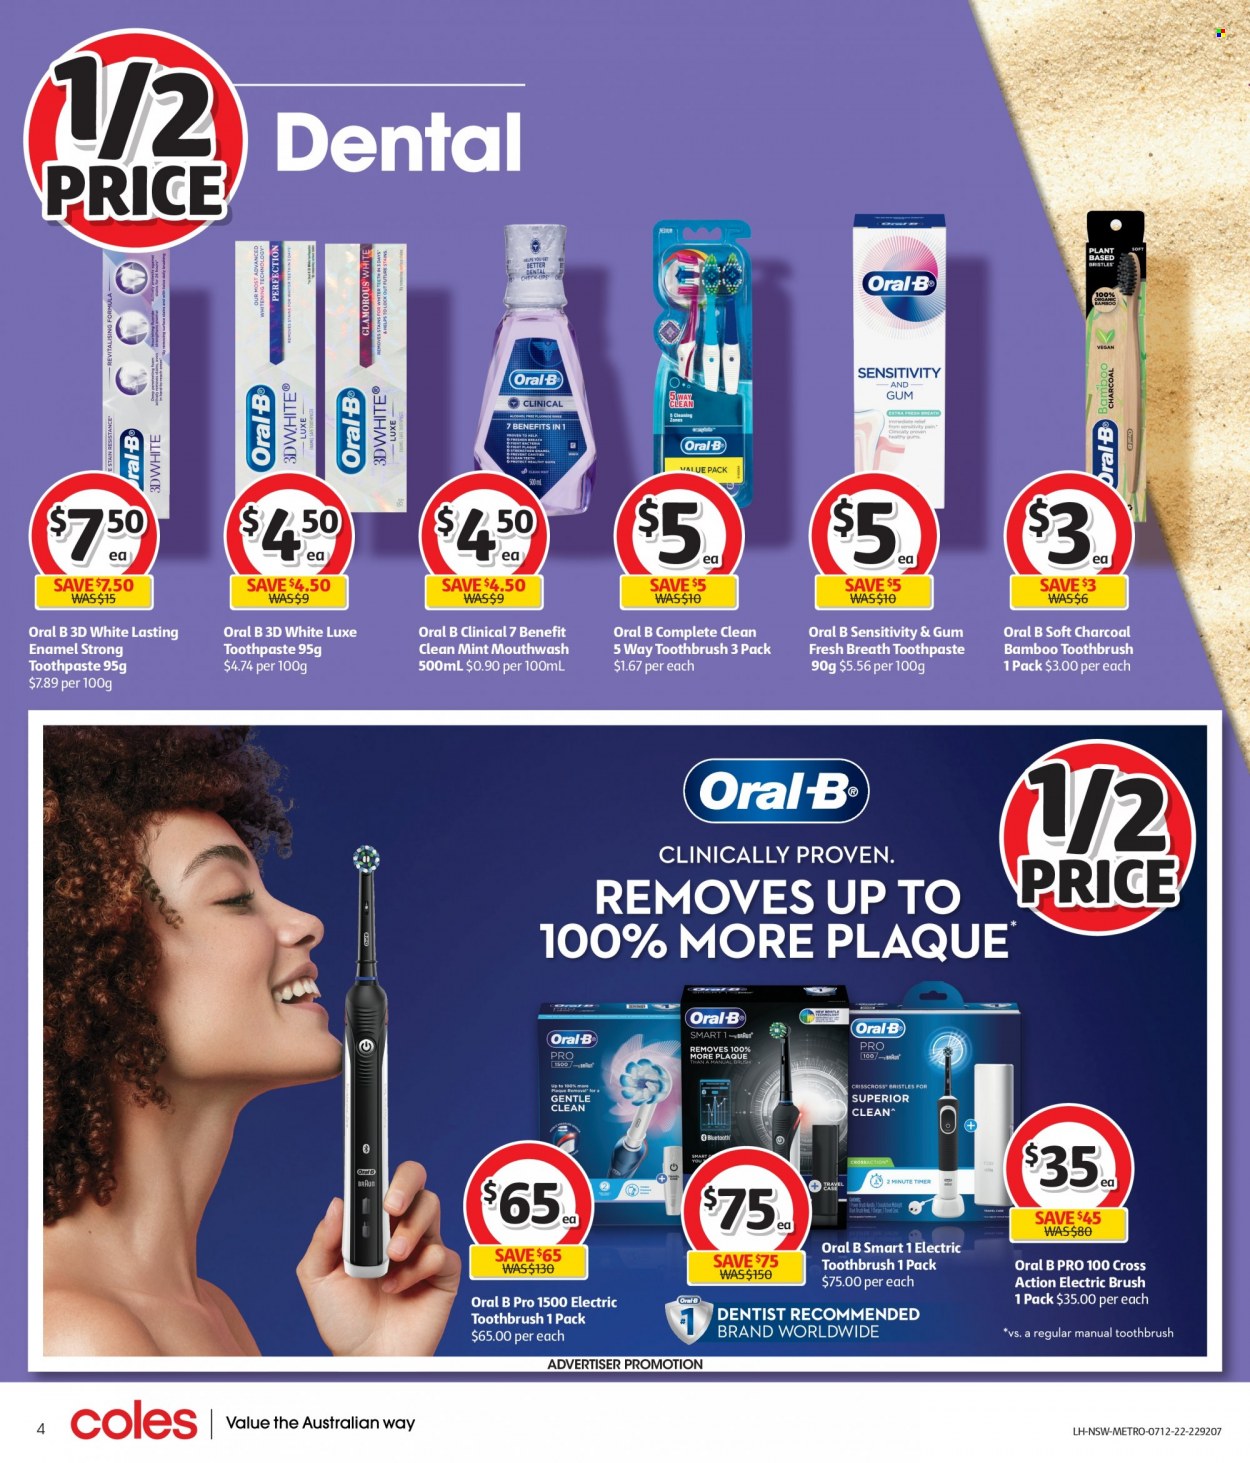 thumbnail - Coles Catalogue - 7 Dec 2022 - 13 Dec 2022 - Sales products - toothbrush, Oral-B, toothpaste, mouthwash, electric toothbrush, charcoal. Page 4.